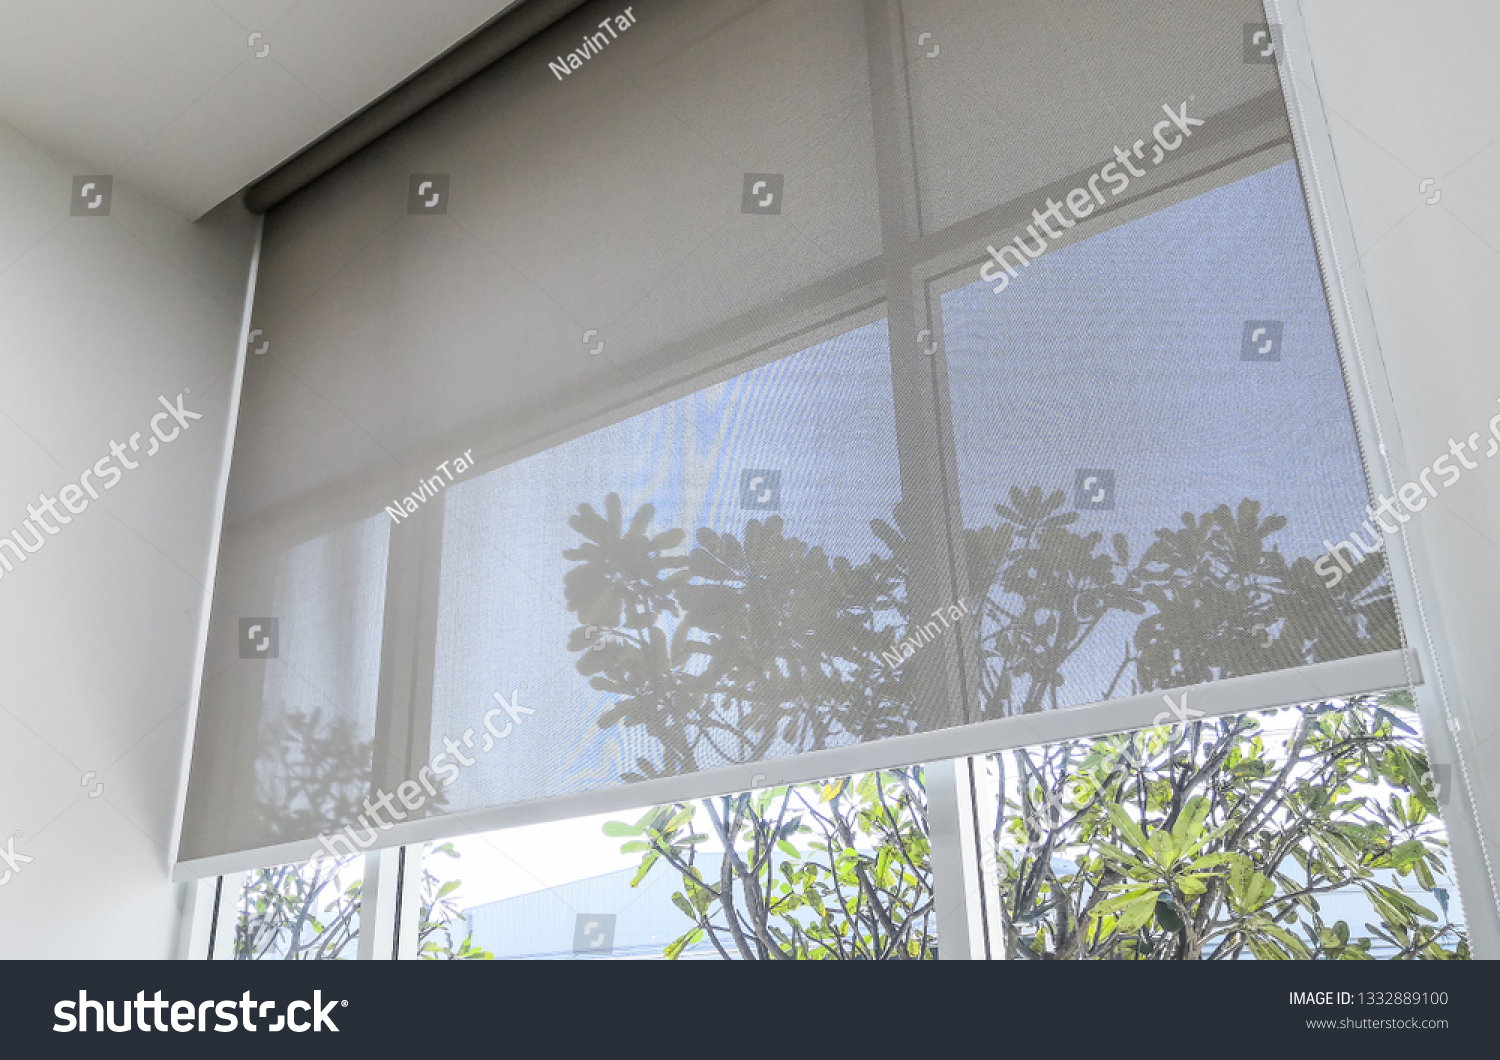 Roll Blinds on the windows, the sun does not penetrate the house. Window in the Interior Roller Blinds. Beautiful Blinds on the Window, the Sun and Heat Protection, the Perfect Windows Interior Decor #1332889100